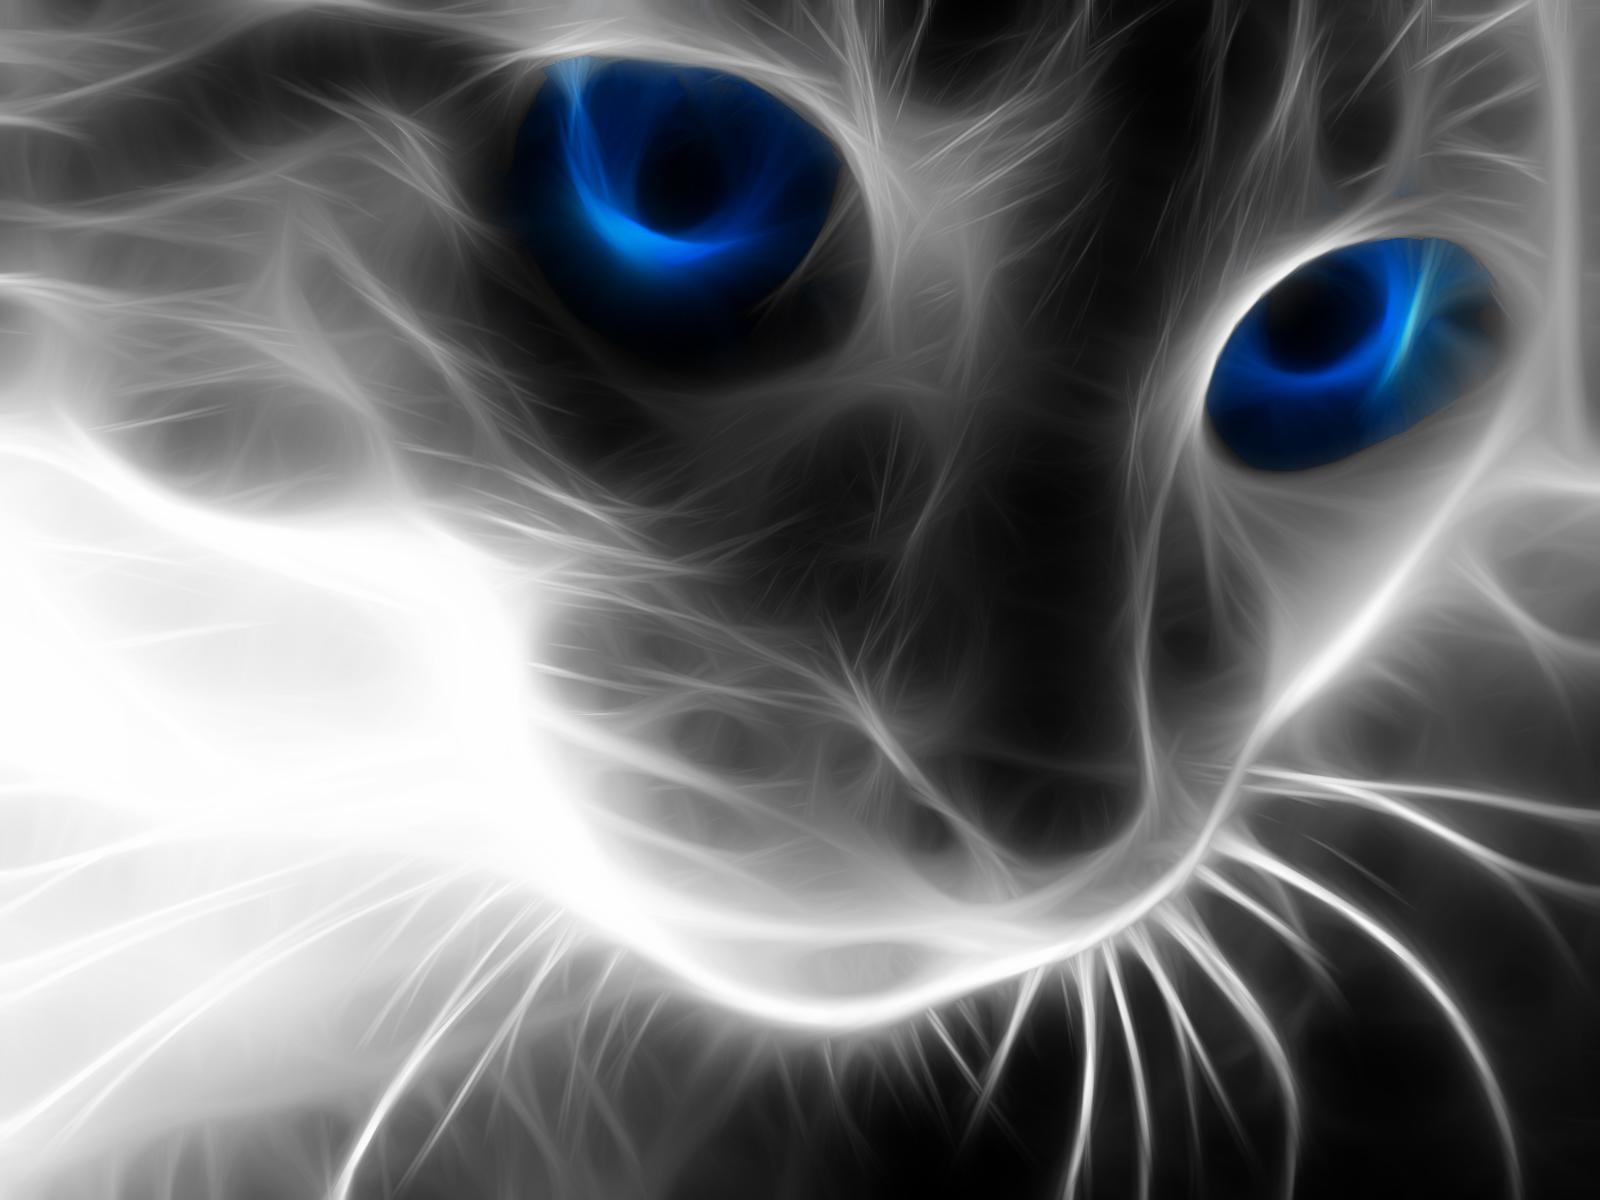 Cat Cool Wallpaper Free Download for iPhone, Android, Windows